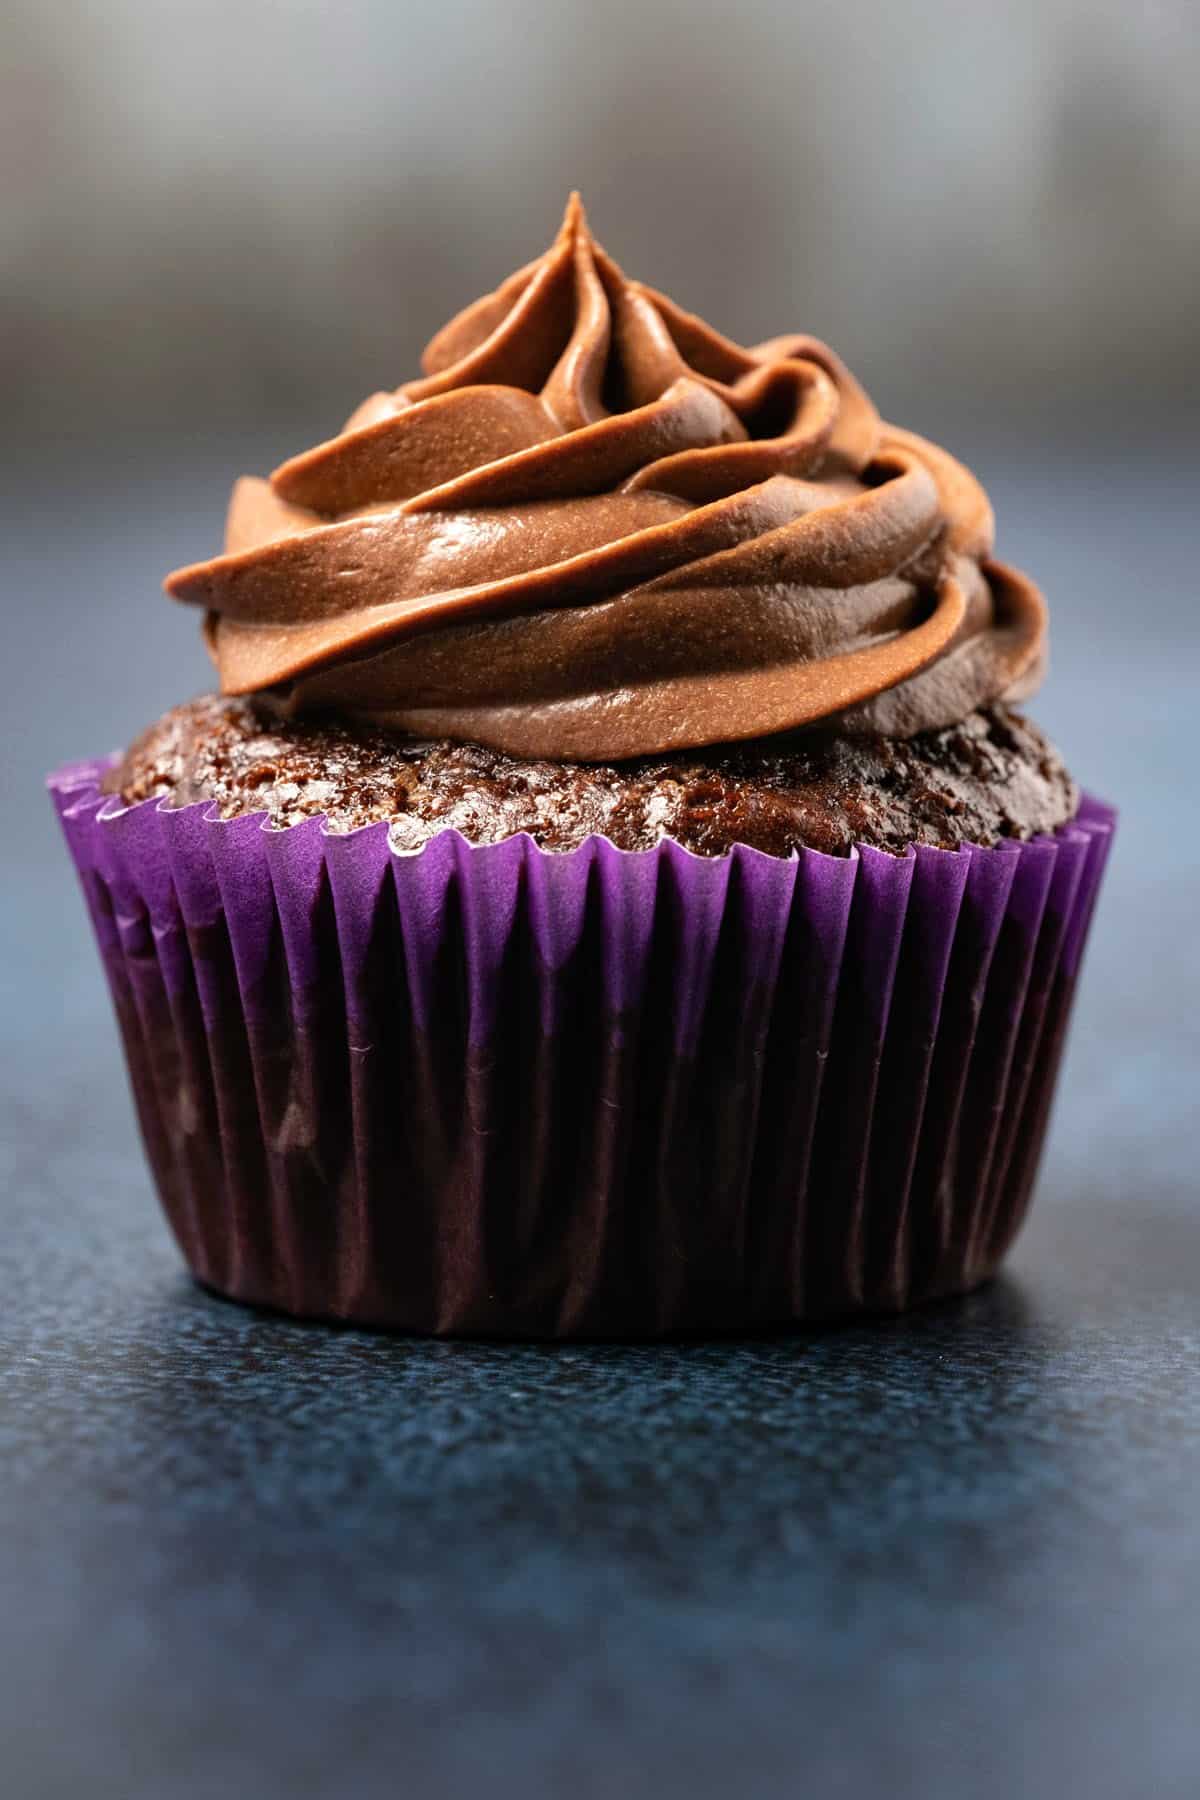 Chocolate cupcake topped with whipped ganache frosting. 